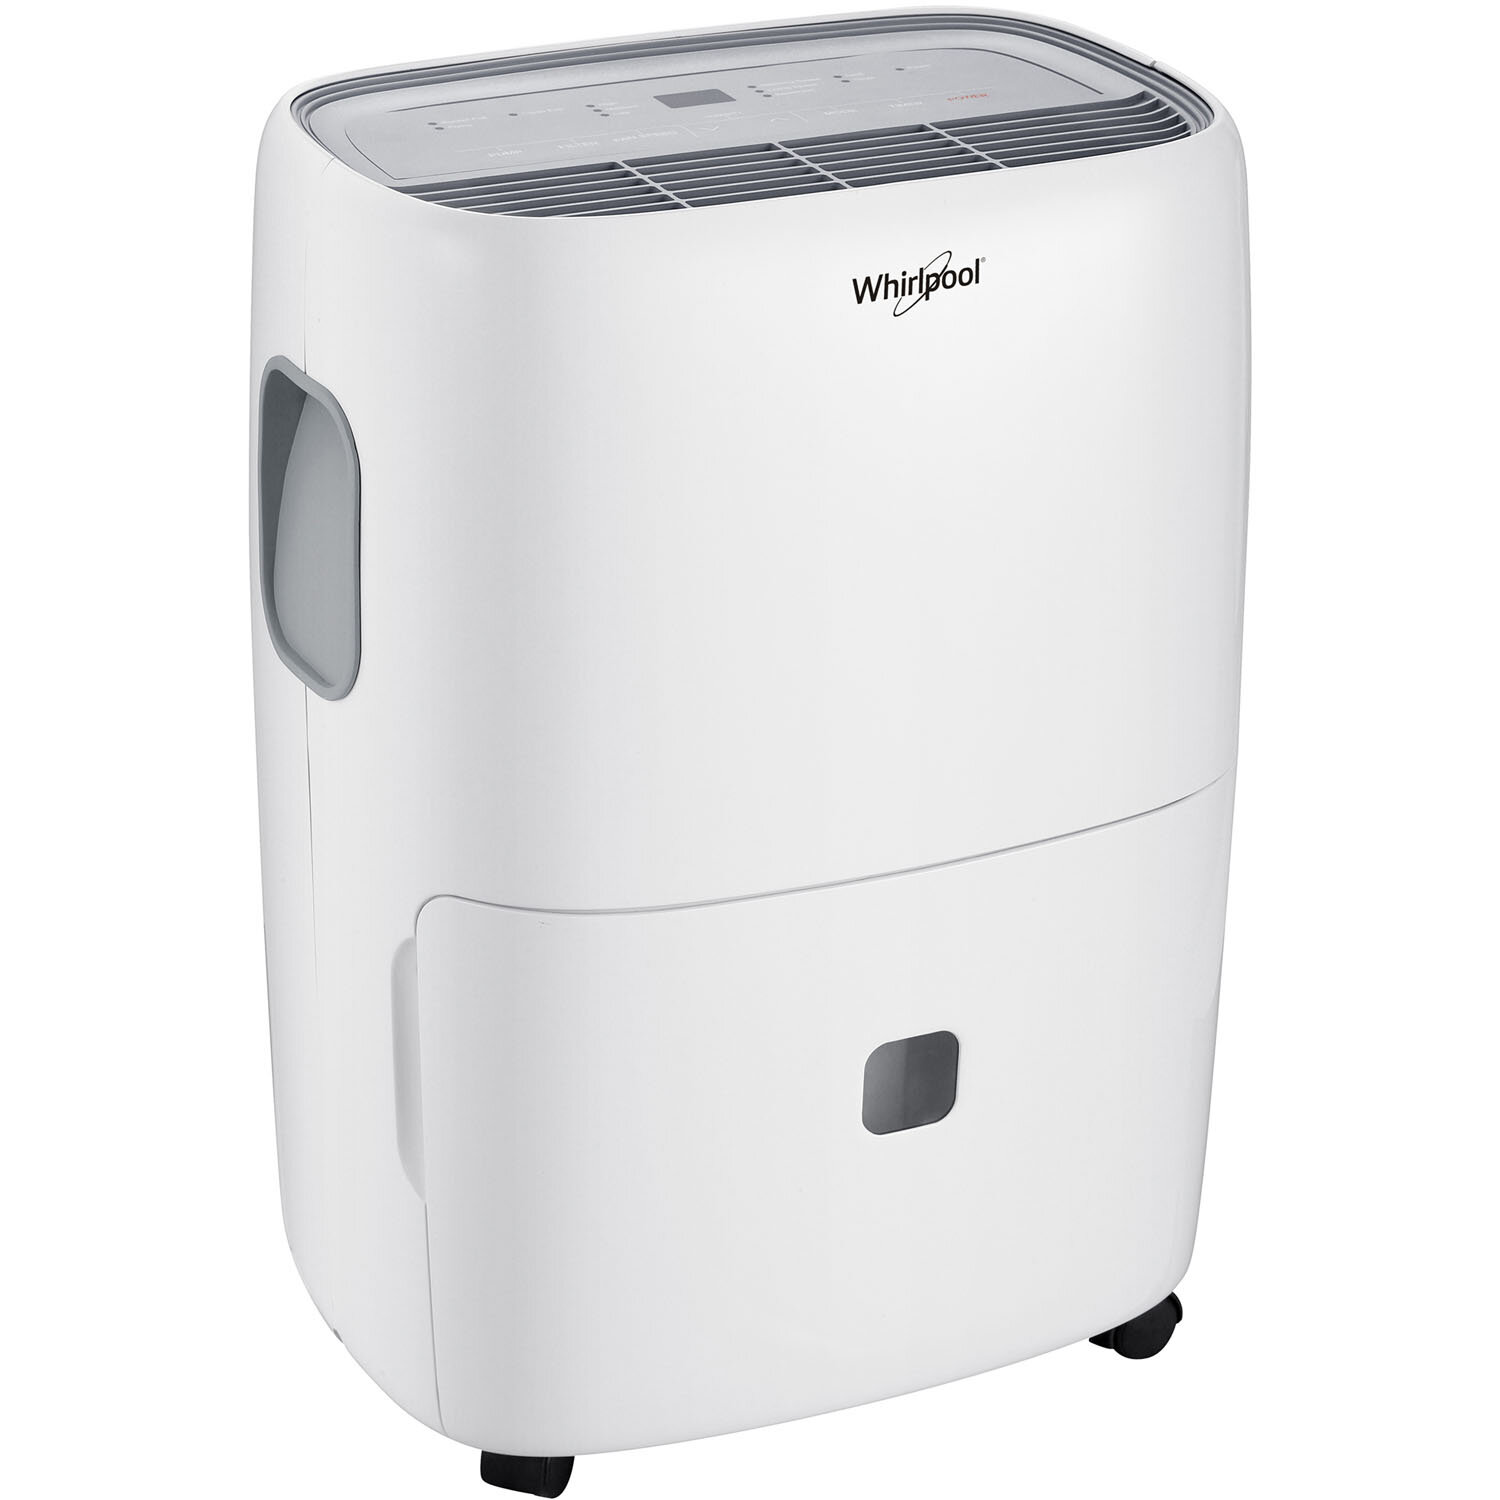 Programmable Humidistat Ivation 4,500 Sq Ft Smart Wi-Fi Energy Star Dehumidifier with App 2.25 Gal Reservoir and Washable Filter for Medium and Large Rooms Continuous Draining Hose Connector